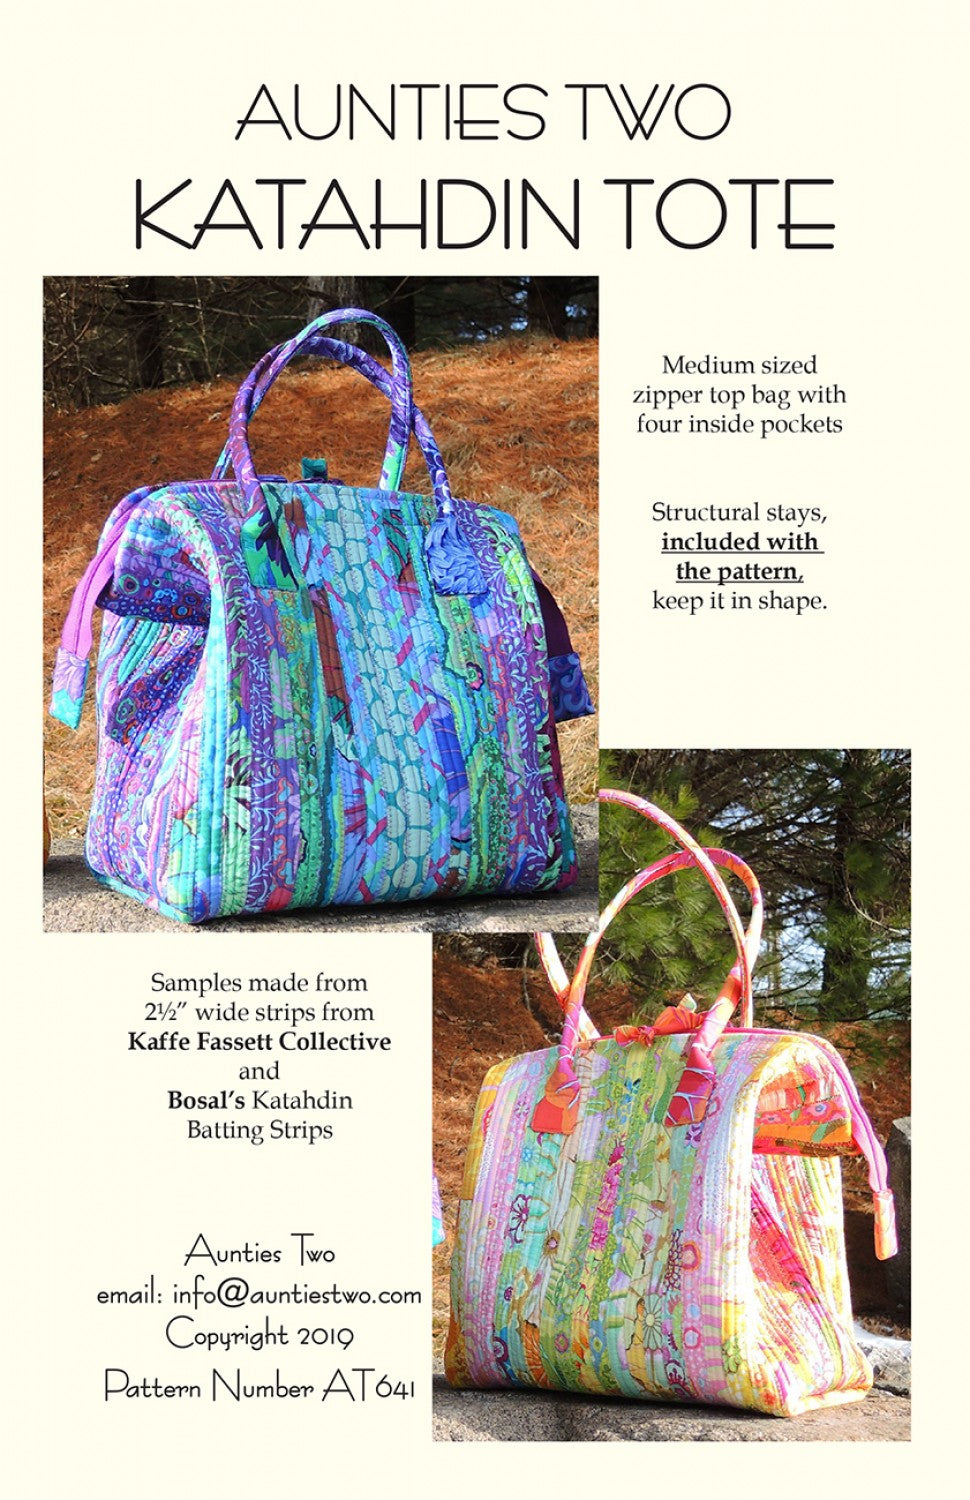 Katahdin Tote Sewing Pattern with Two Bag Stays by Carol McLeod of Aunties Two